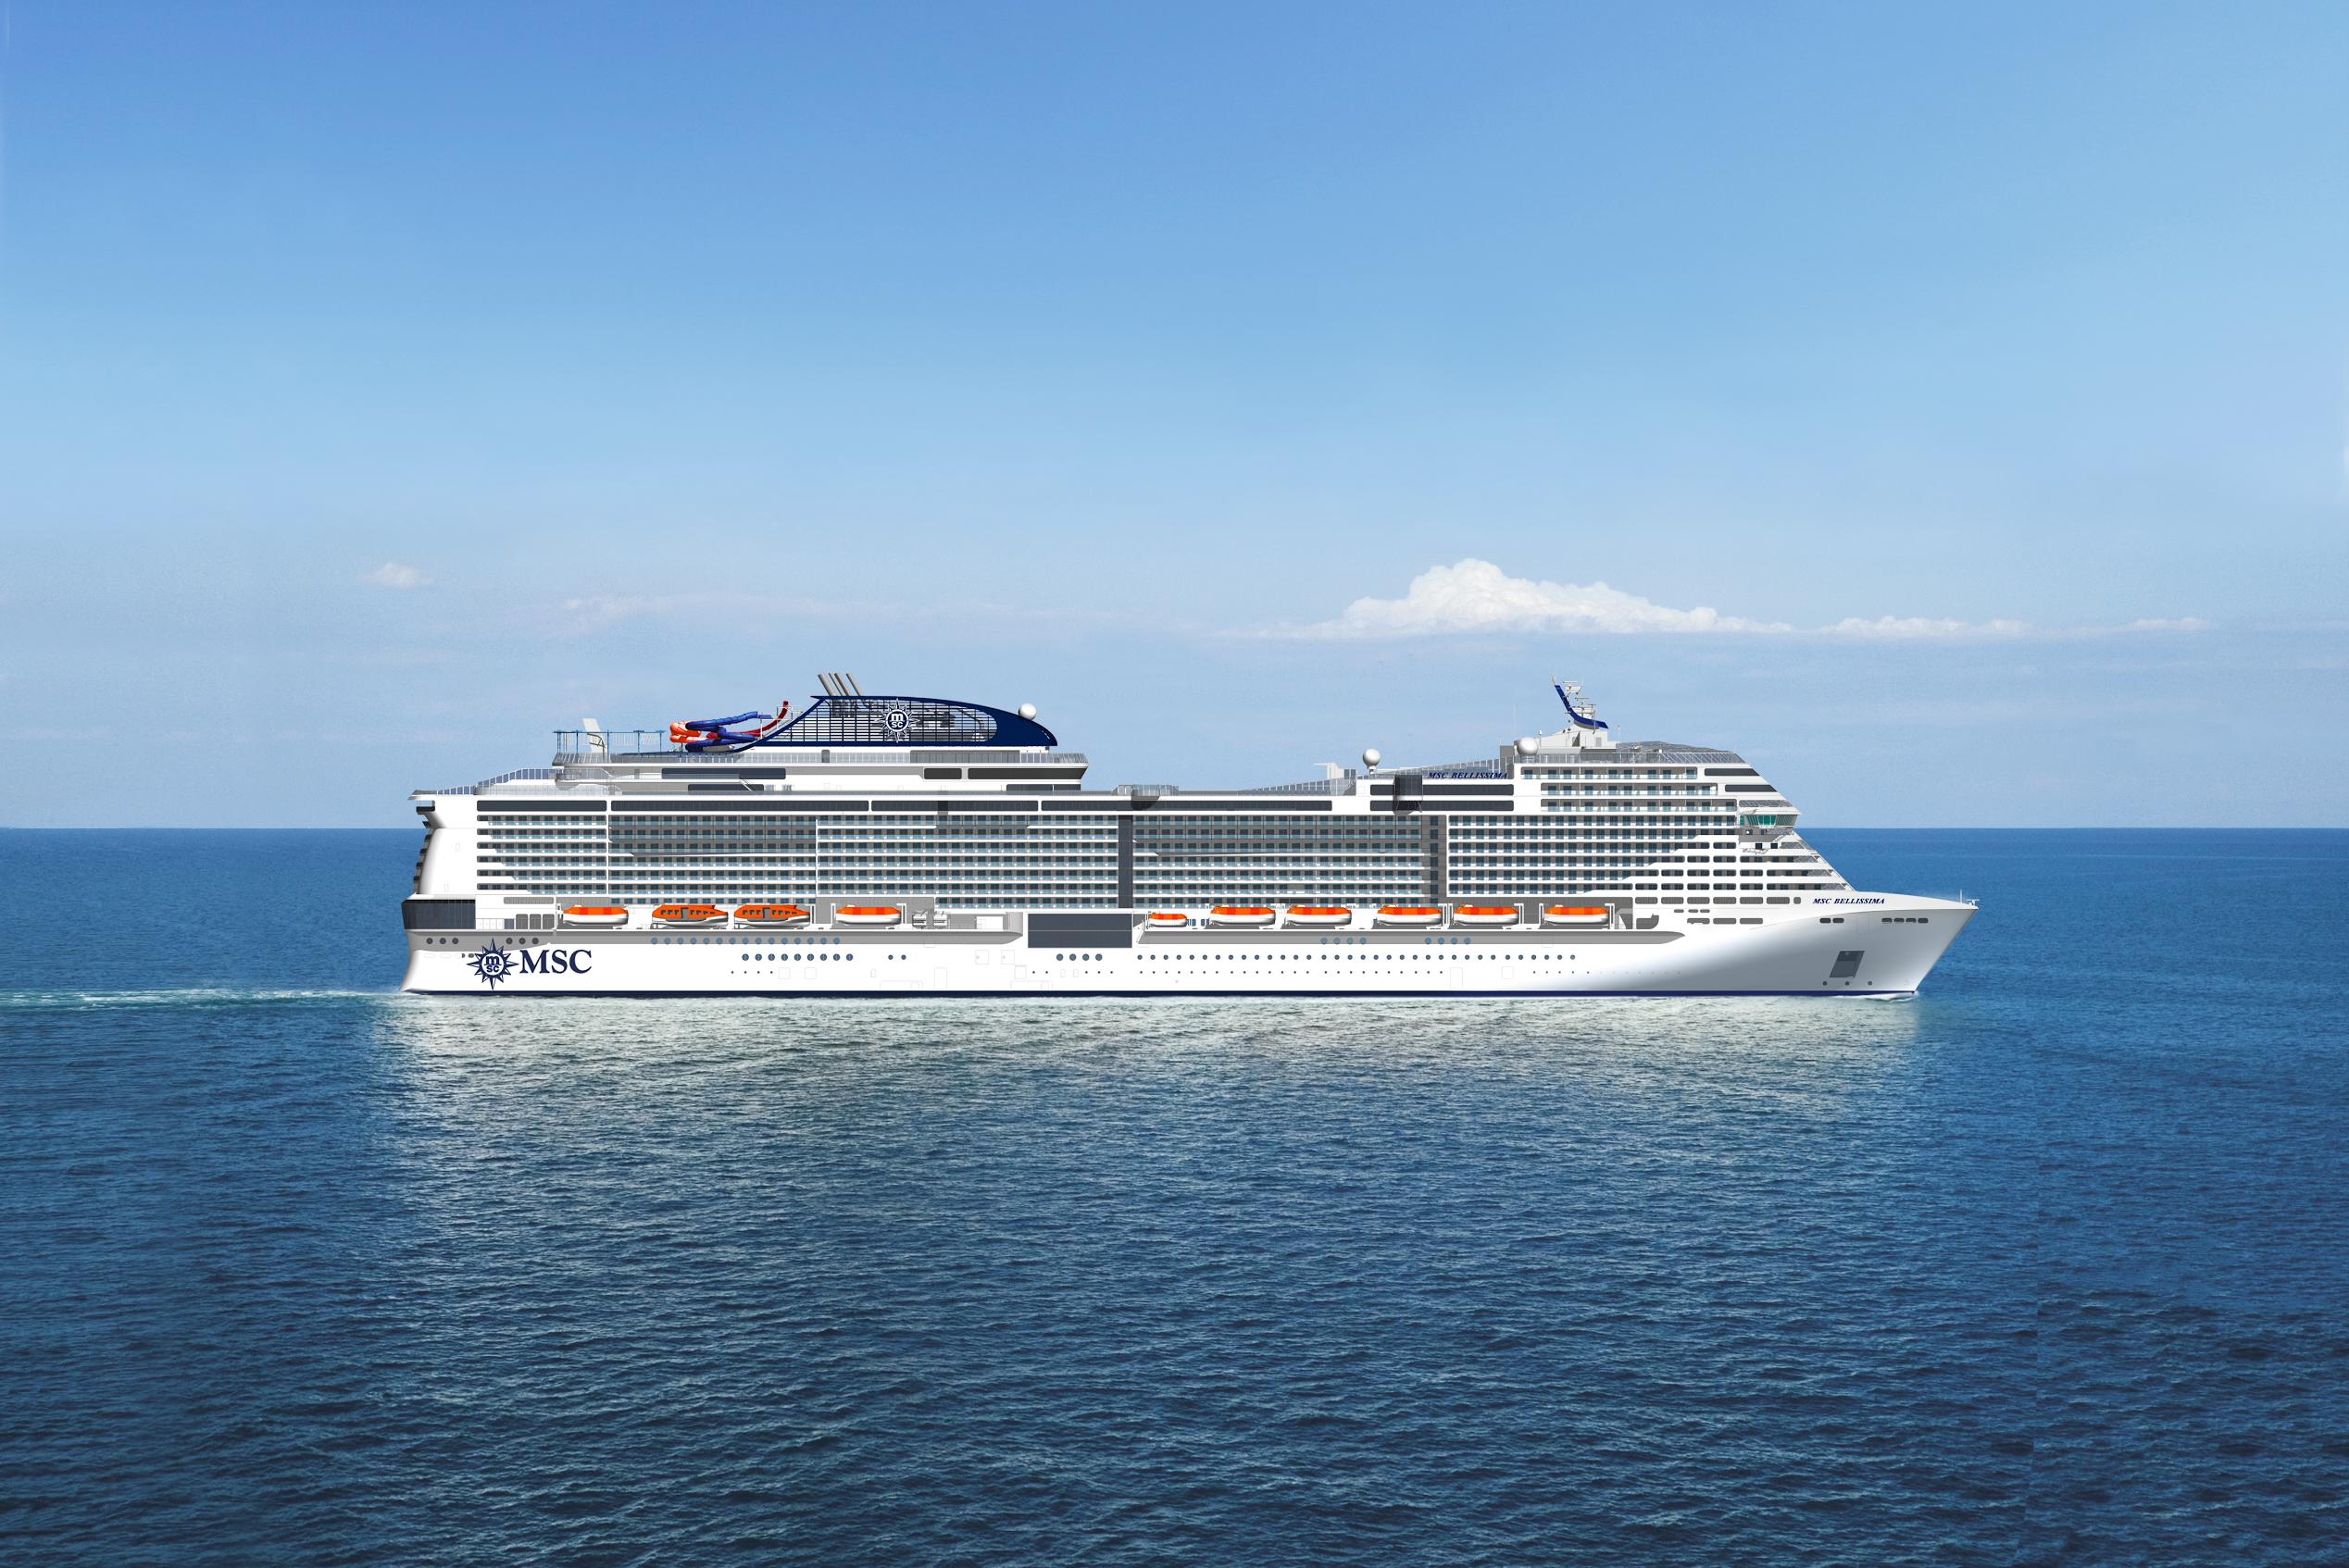 Big plans for MSC's new Asian ship